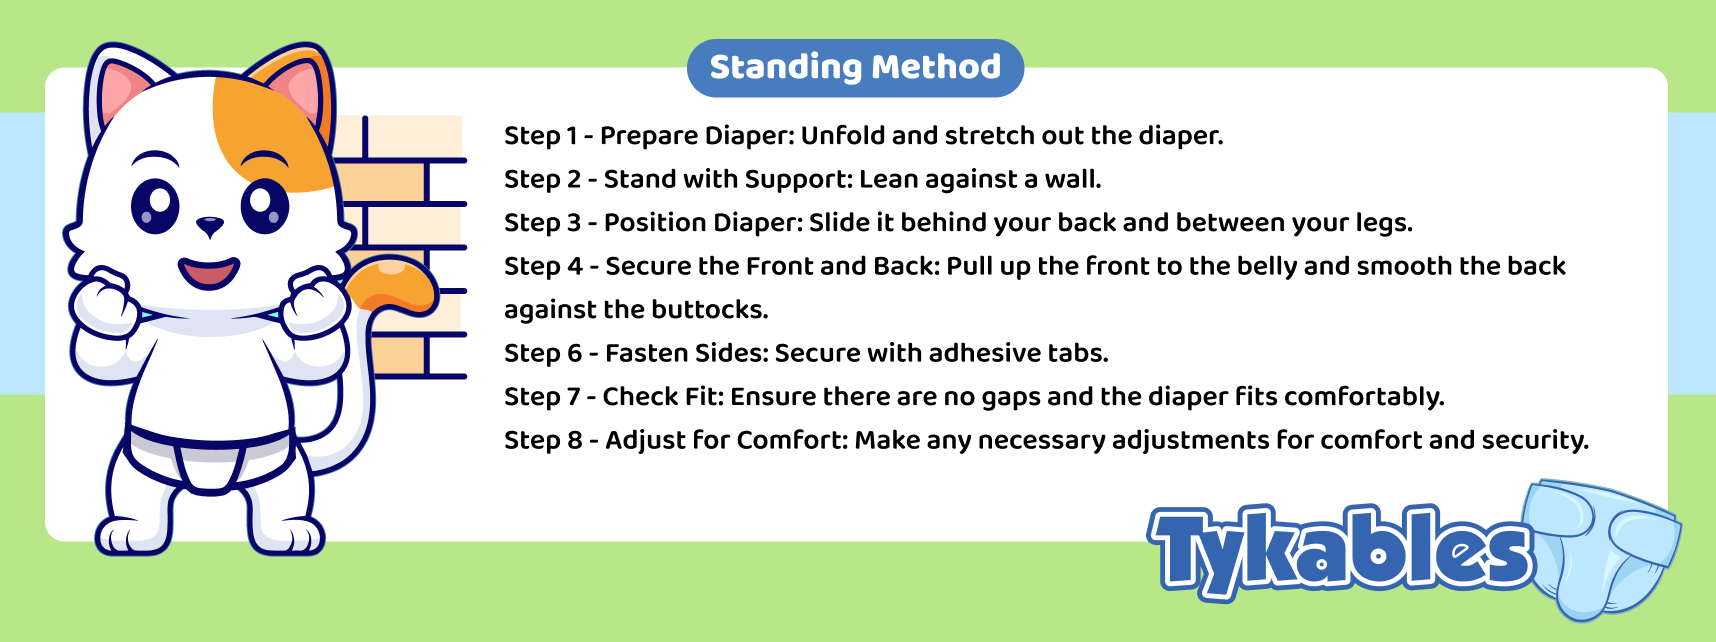 Infographic with the steps for putting on a diaper using the standing method.